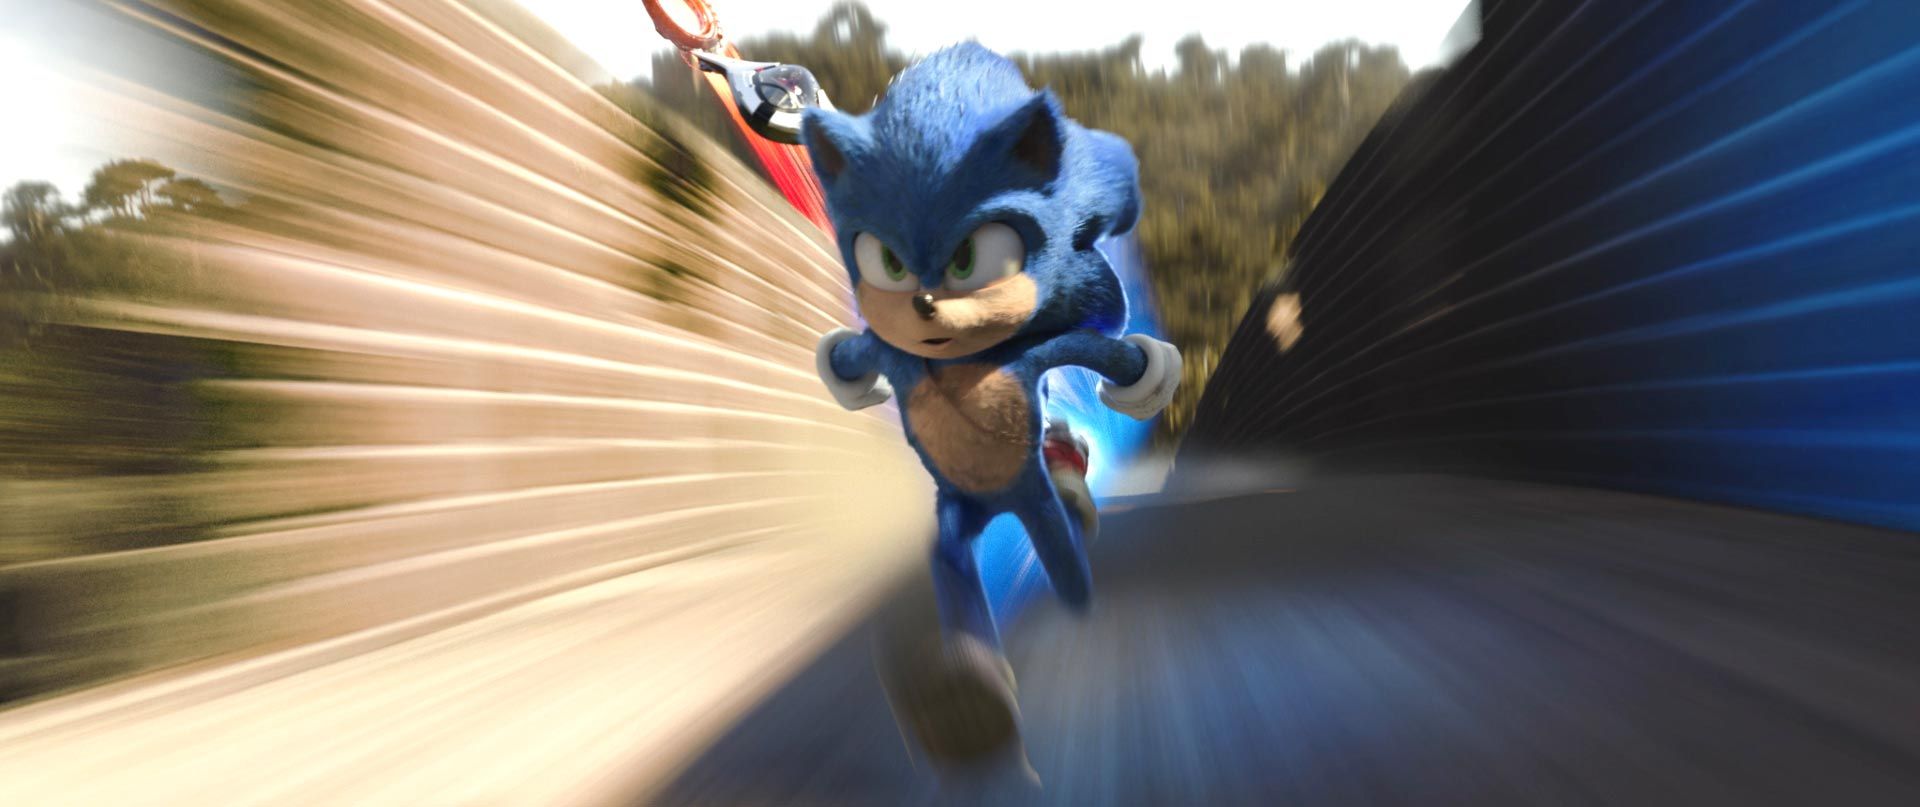 Sonic the Hedgehog running as fast as expected